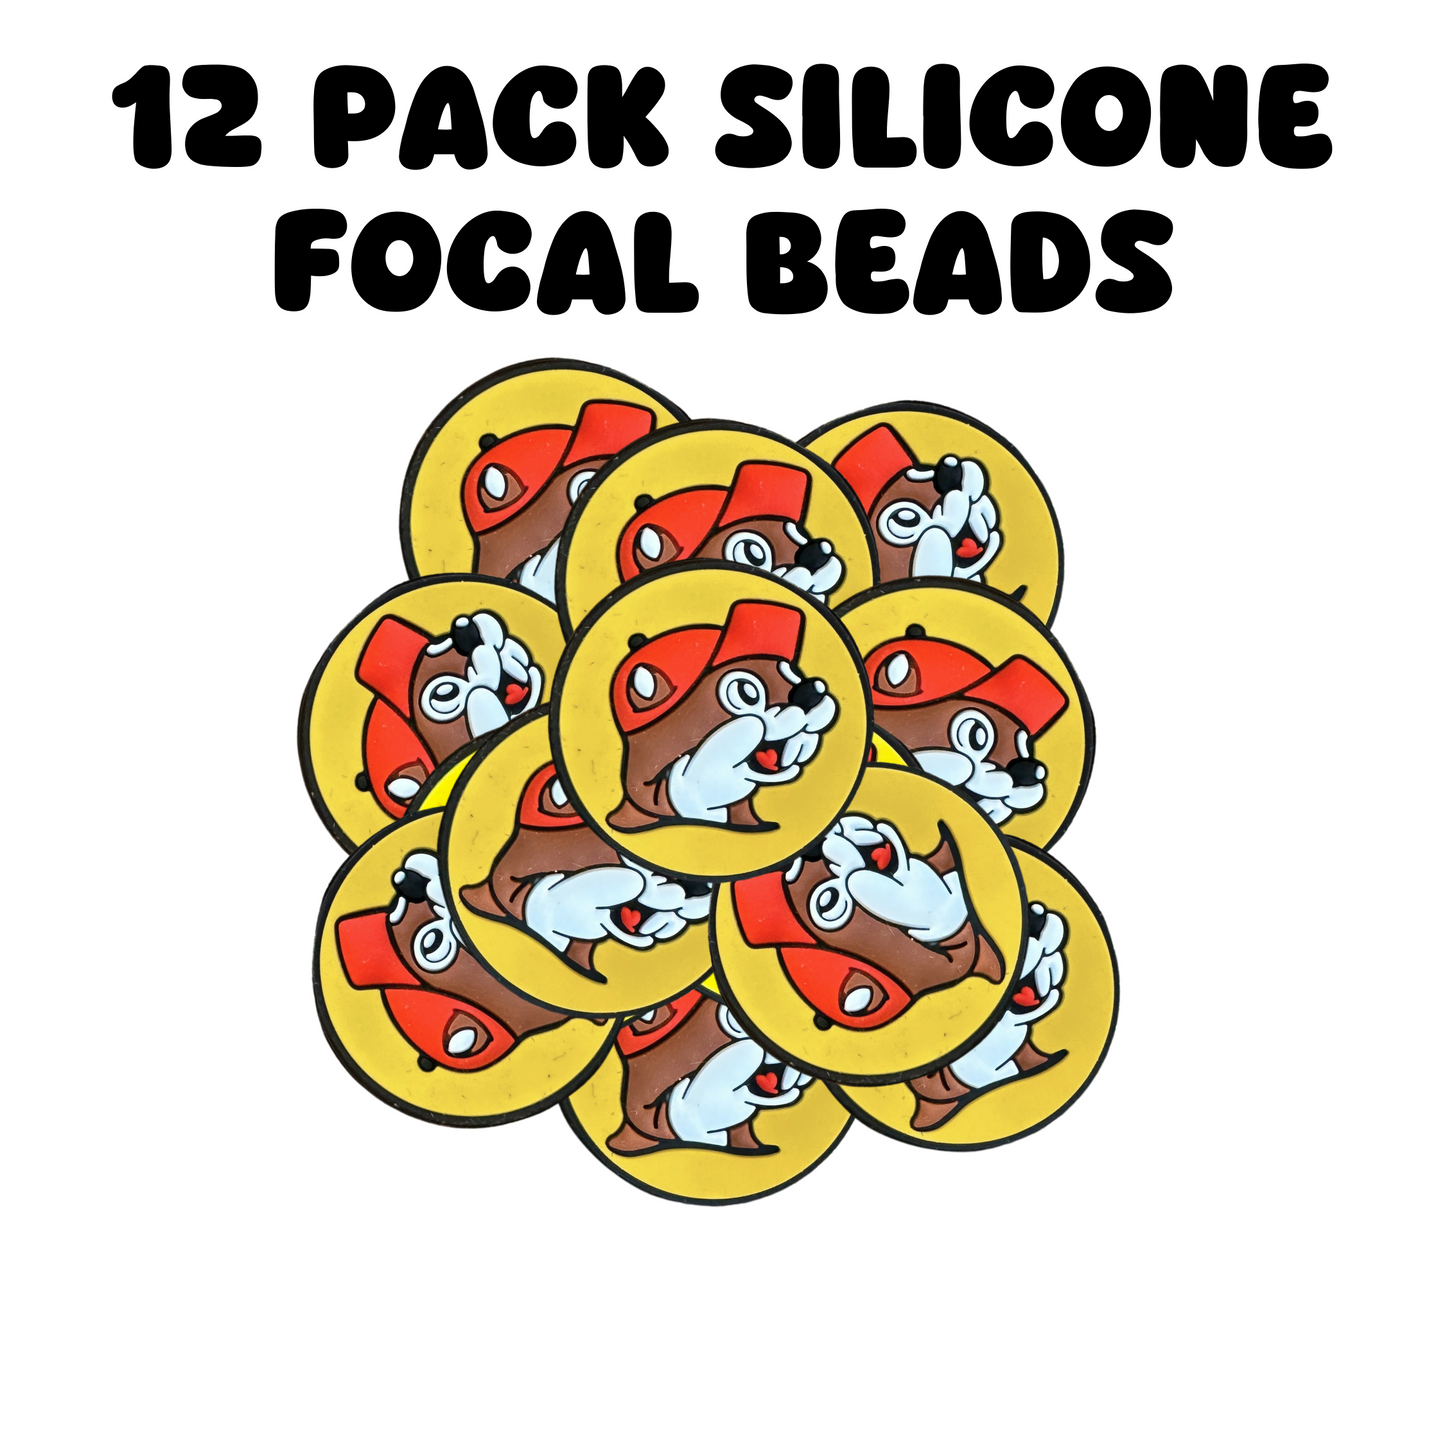 Gas Station Beaver Bucey Texas Silicone Focal Bead | 12 Pack